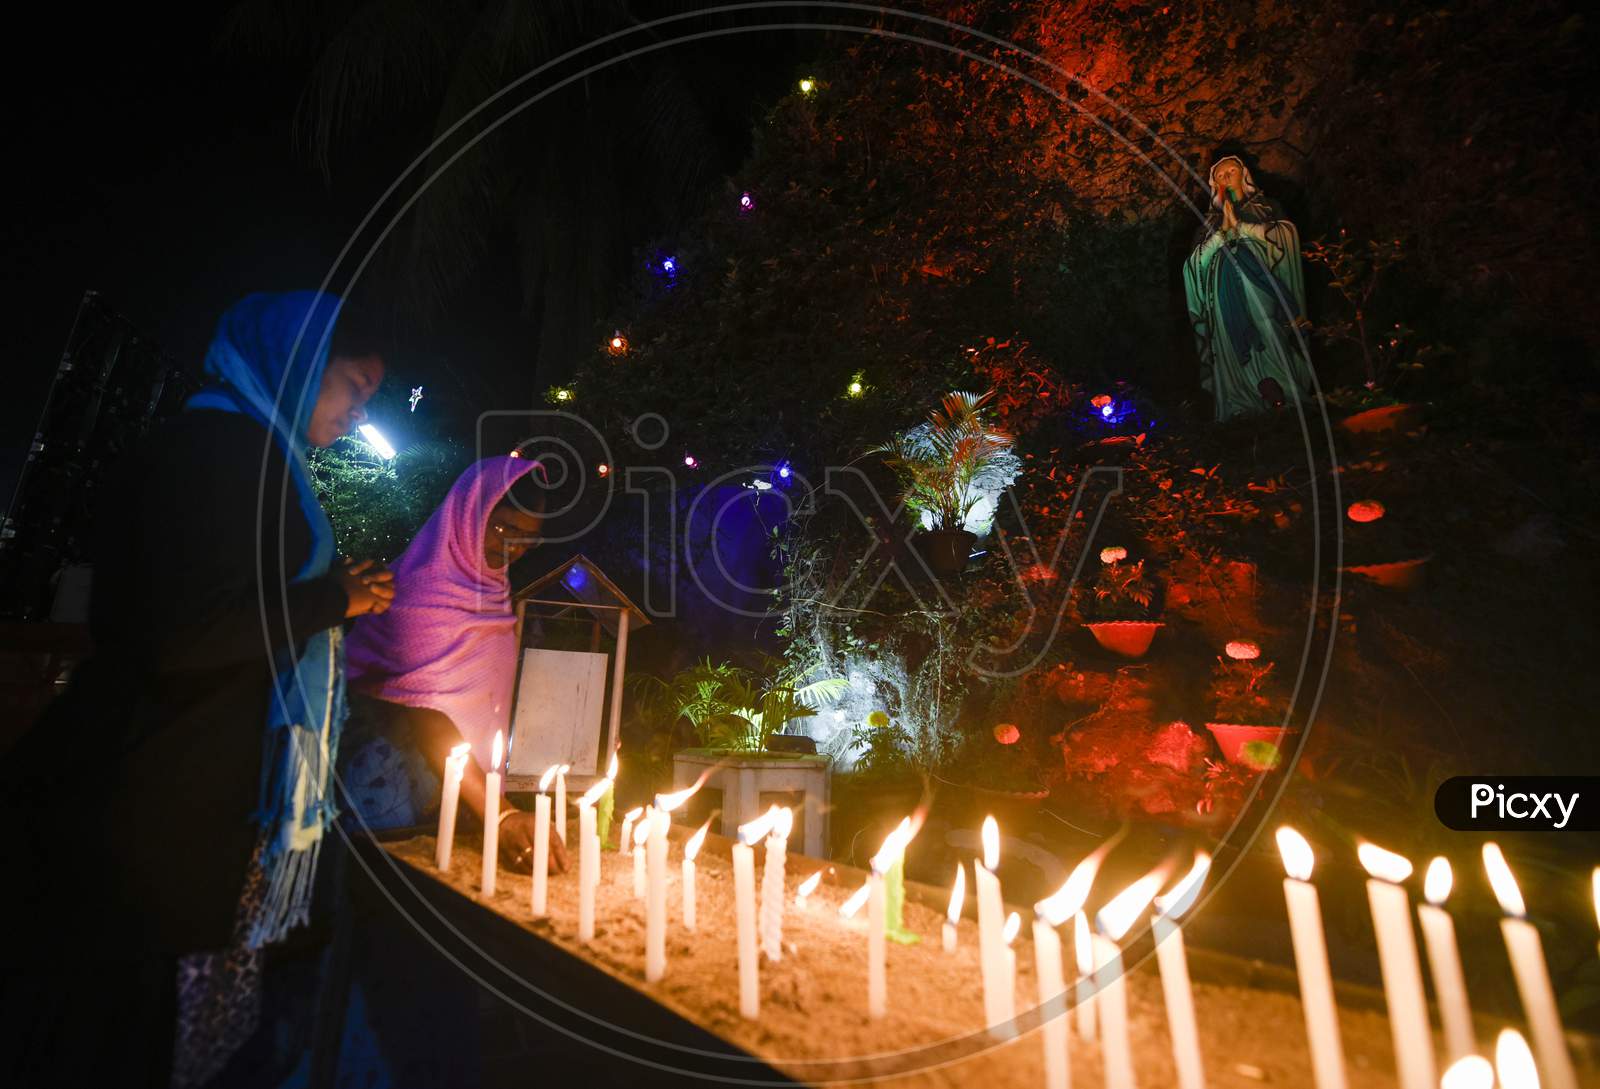 Devotees Light Candles At Saints Johns Church, On The Eve Of Christmas In Guwahati